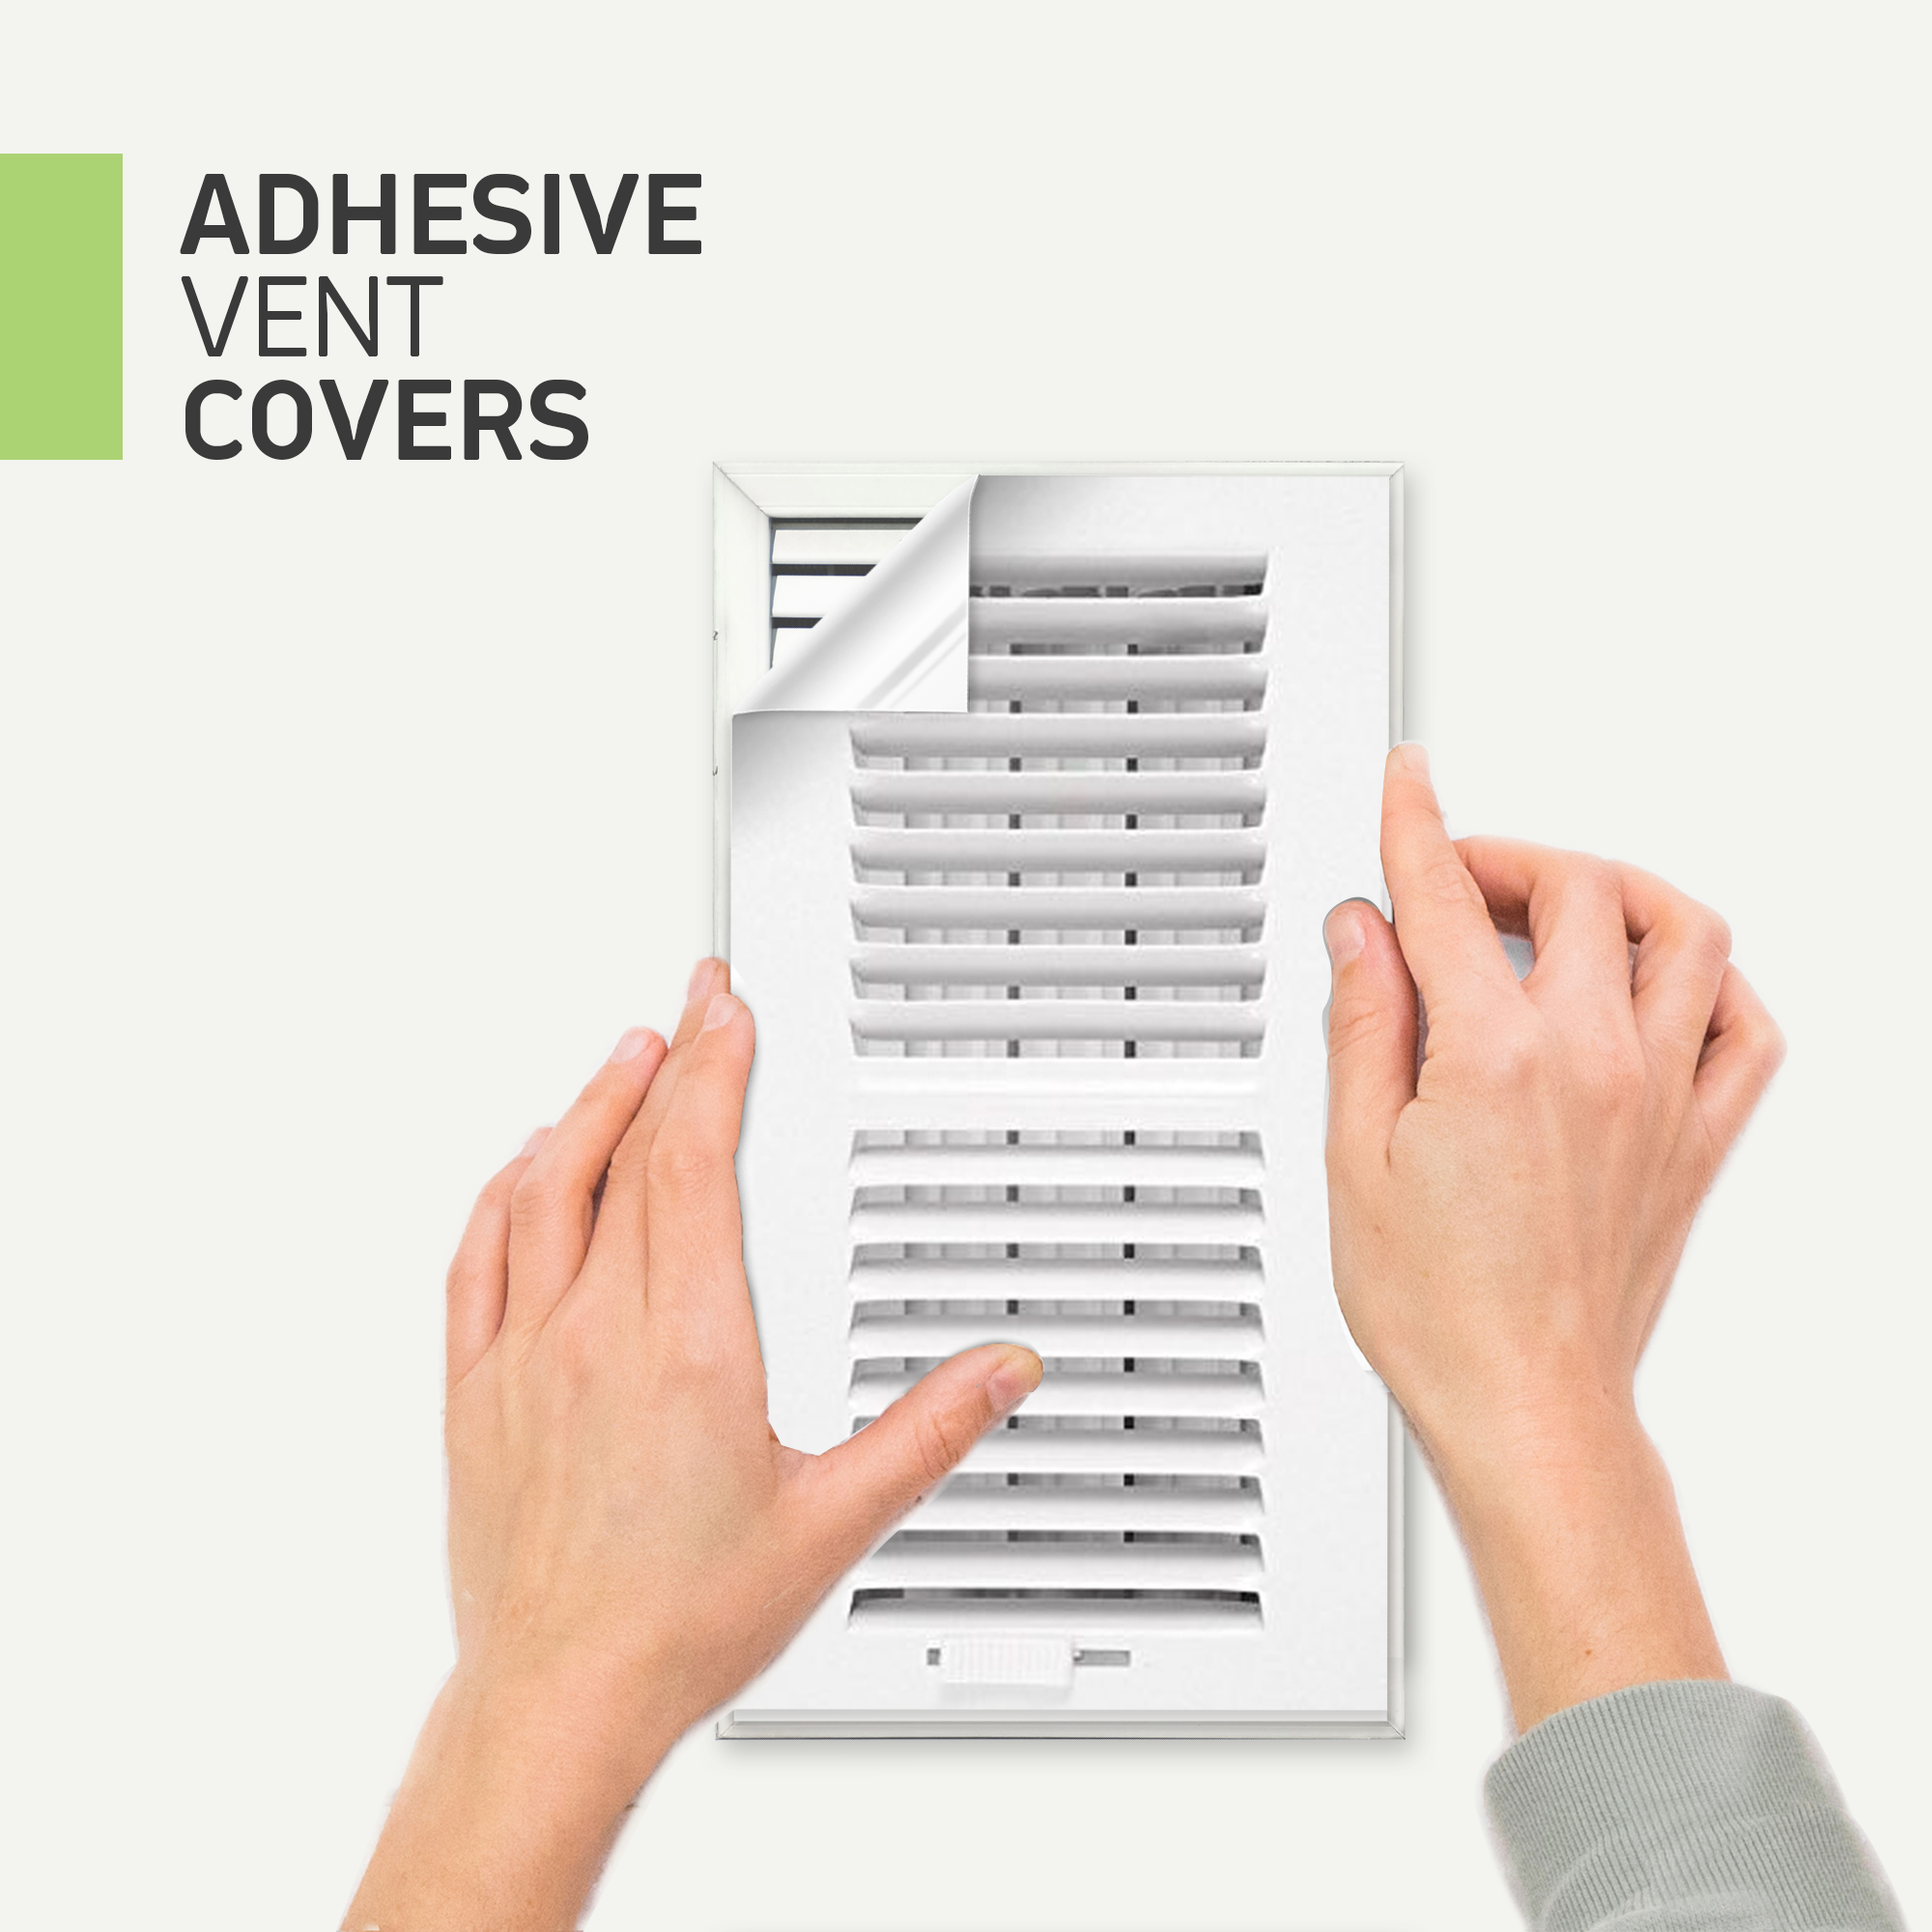 VENT COVER ADHESIVE Register Cover for Air Vents & Looks like a Vent  Grille! An AC Vent Deflector that's Peel n Stick ( 8 x 15)